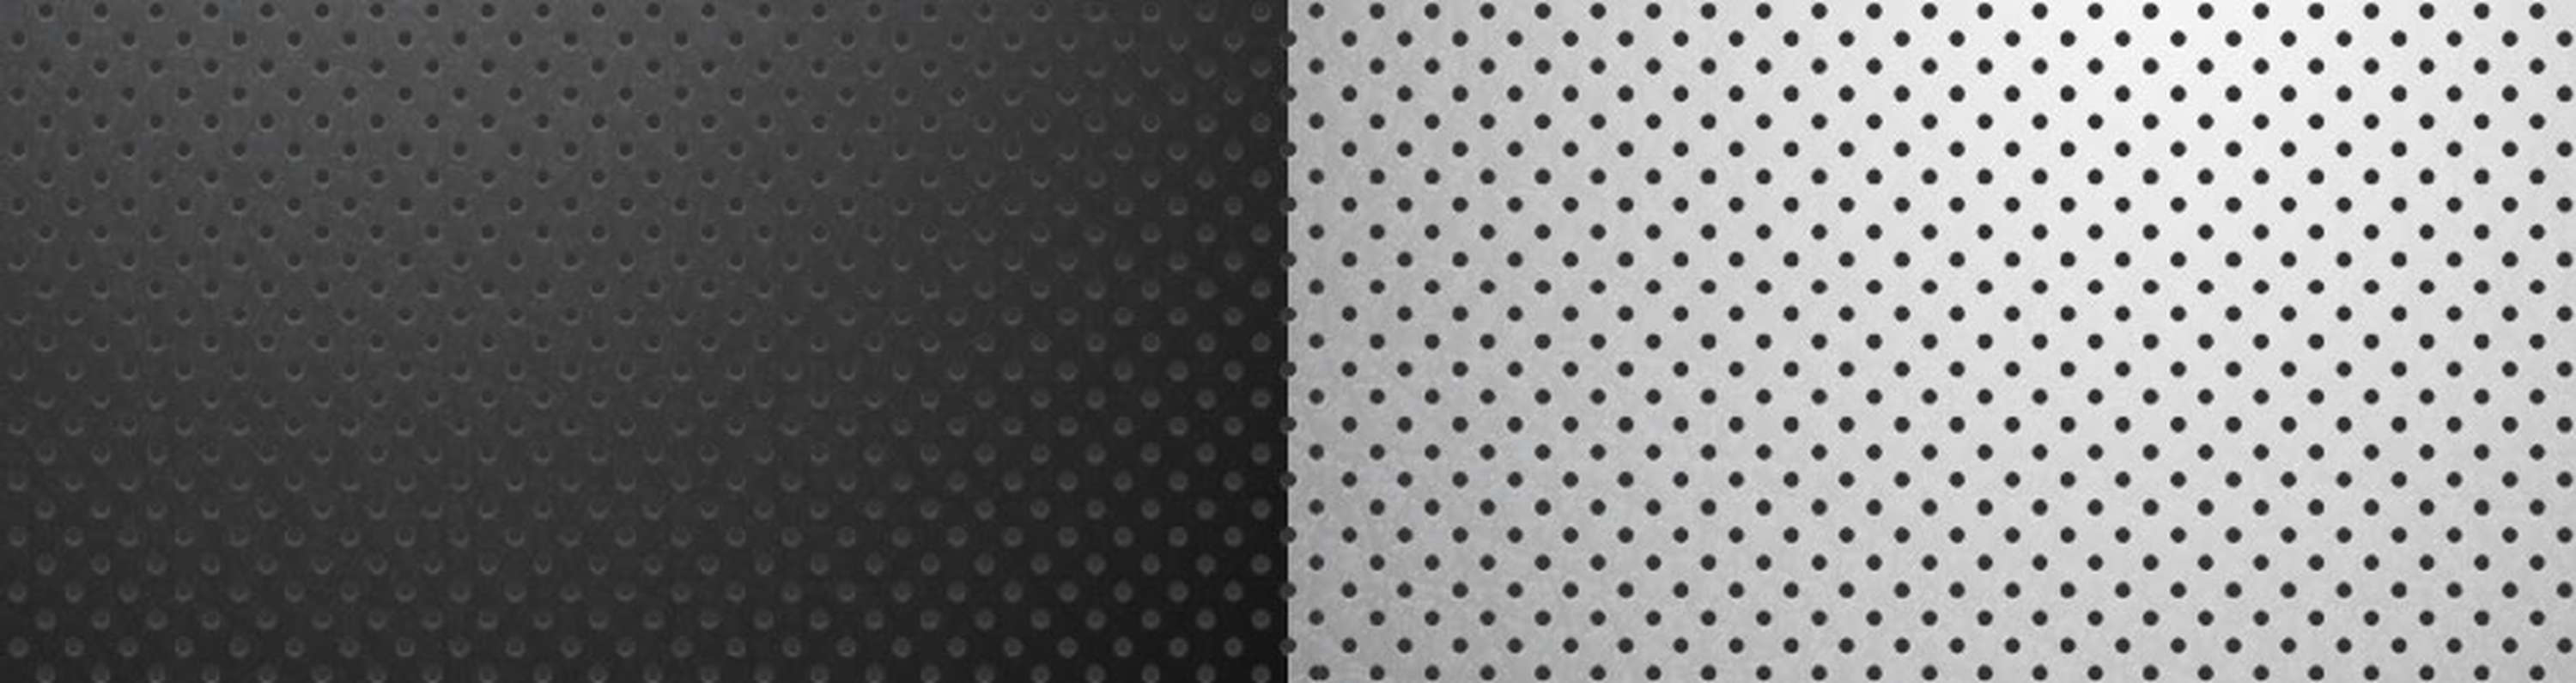 Iphone 5 Background Aired Leather Preview - Polka Dot - HD Wallpaper 